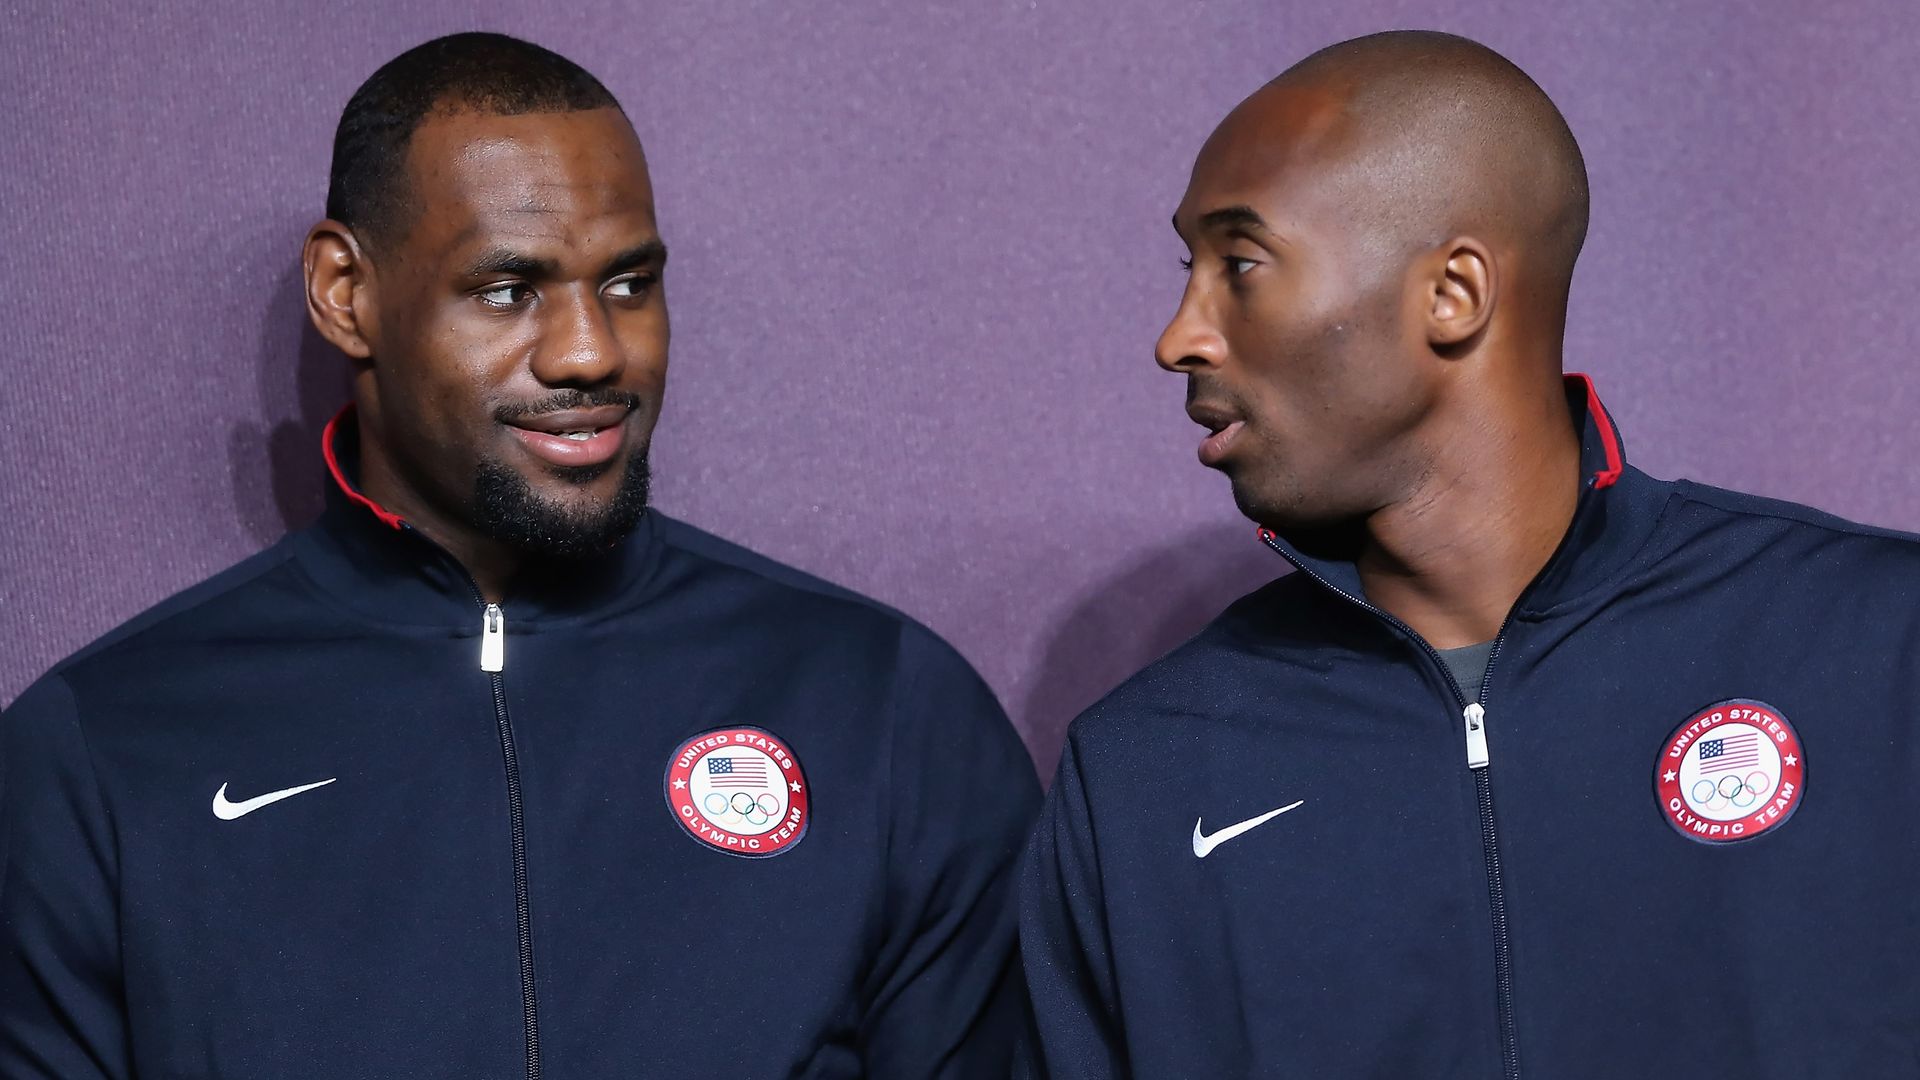 LeBron James (L) and Kobe Bryant (R) look on during a basketball press conference on July 27, 2012, in London, England, ahead of the London 2012 Olympics.  